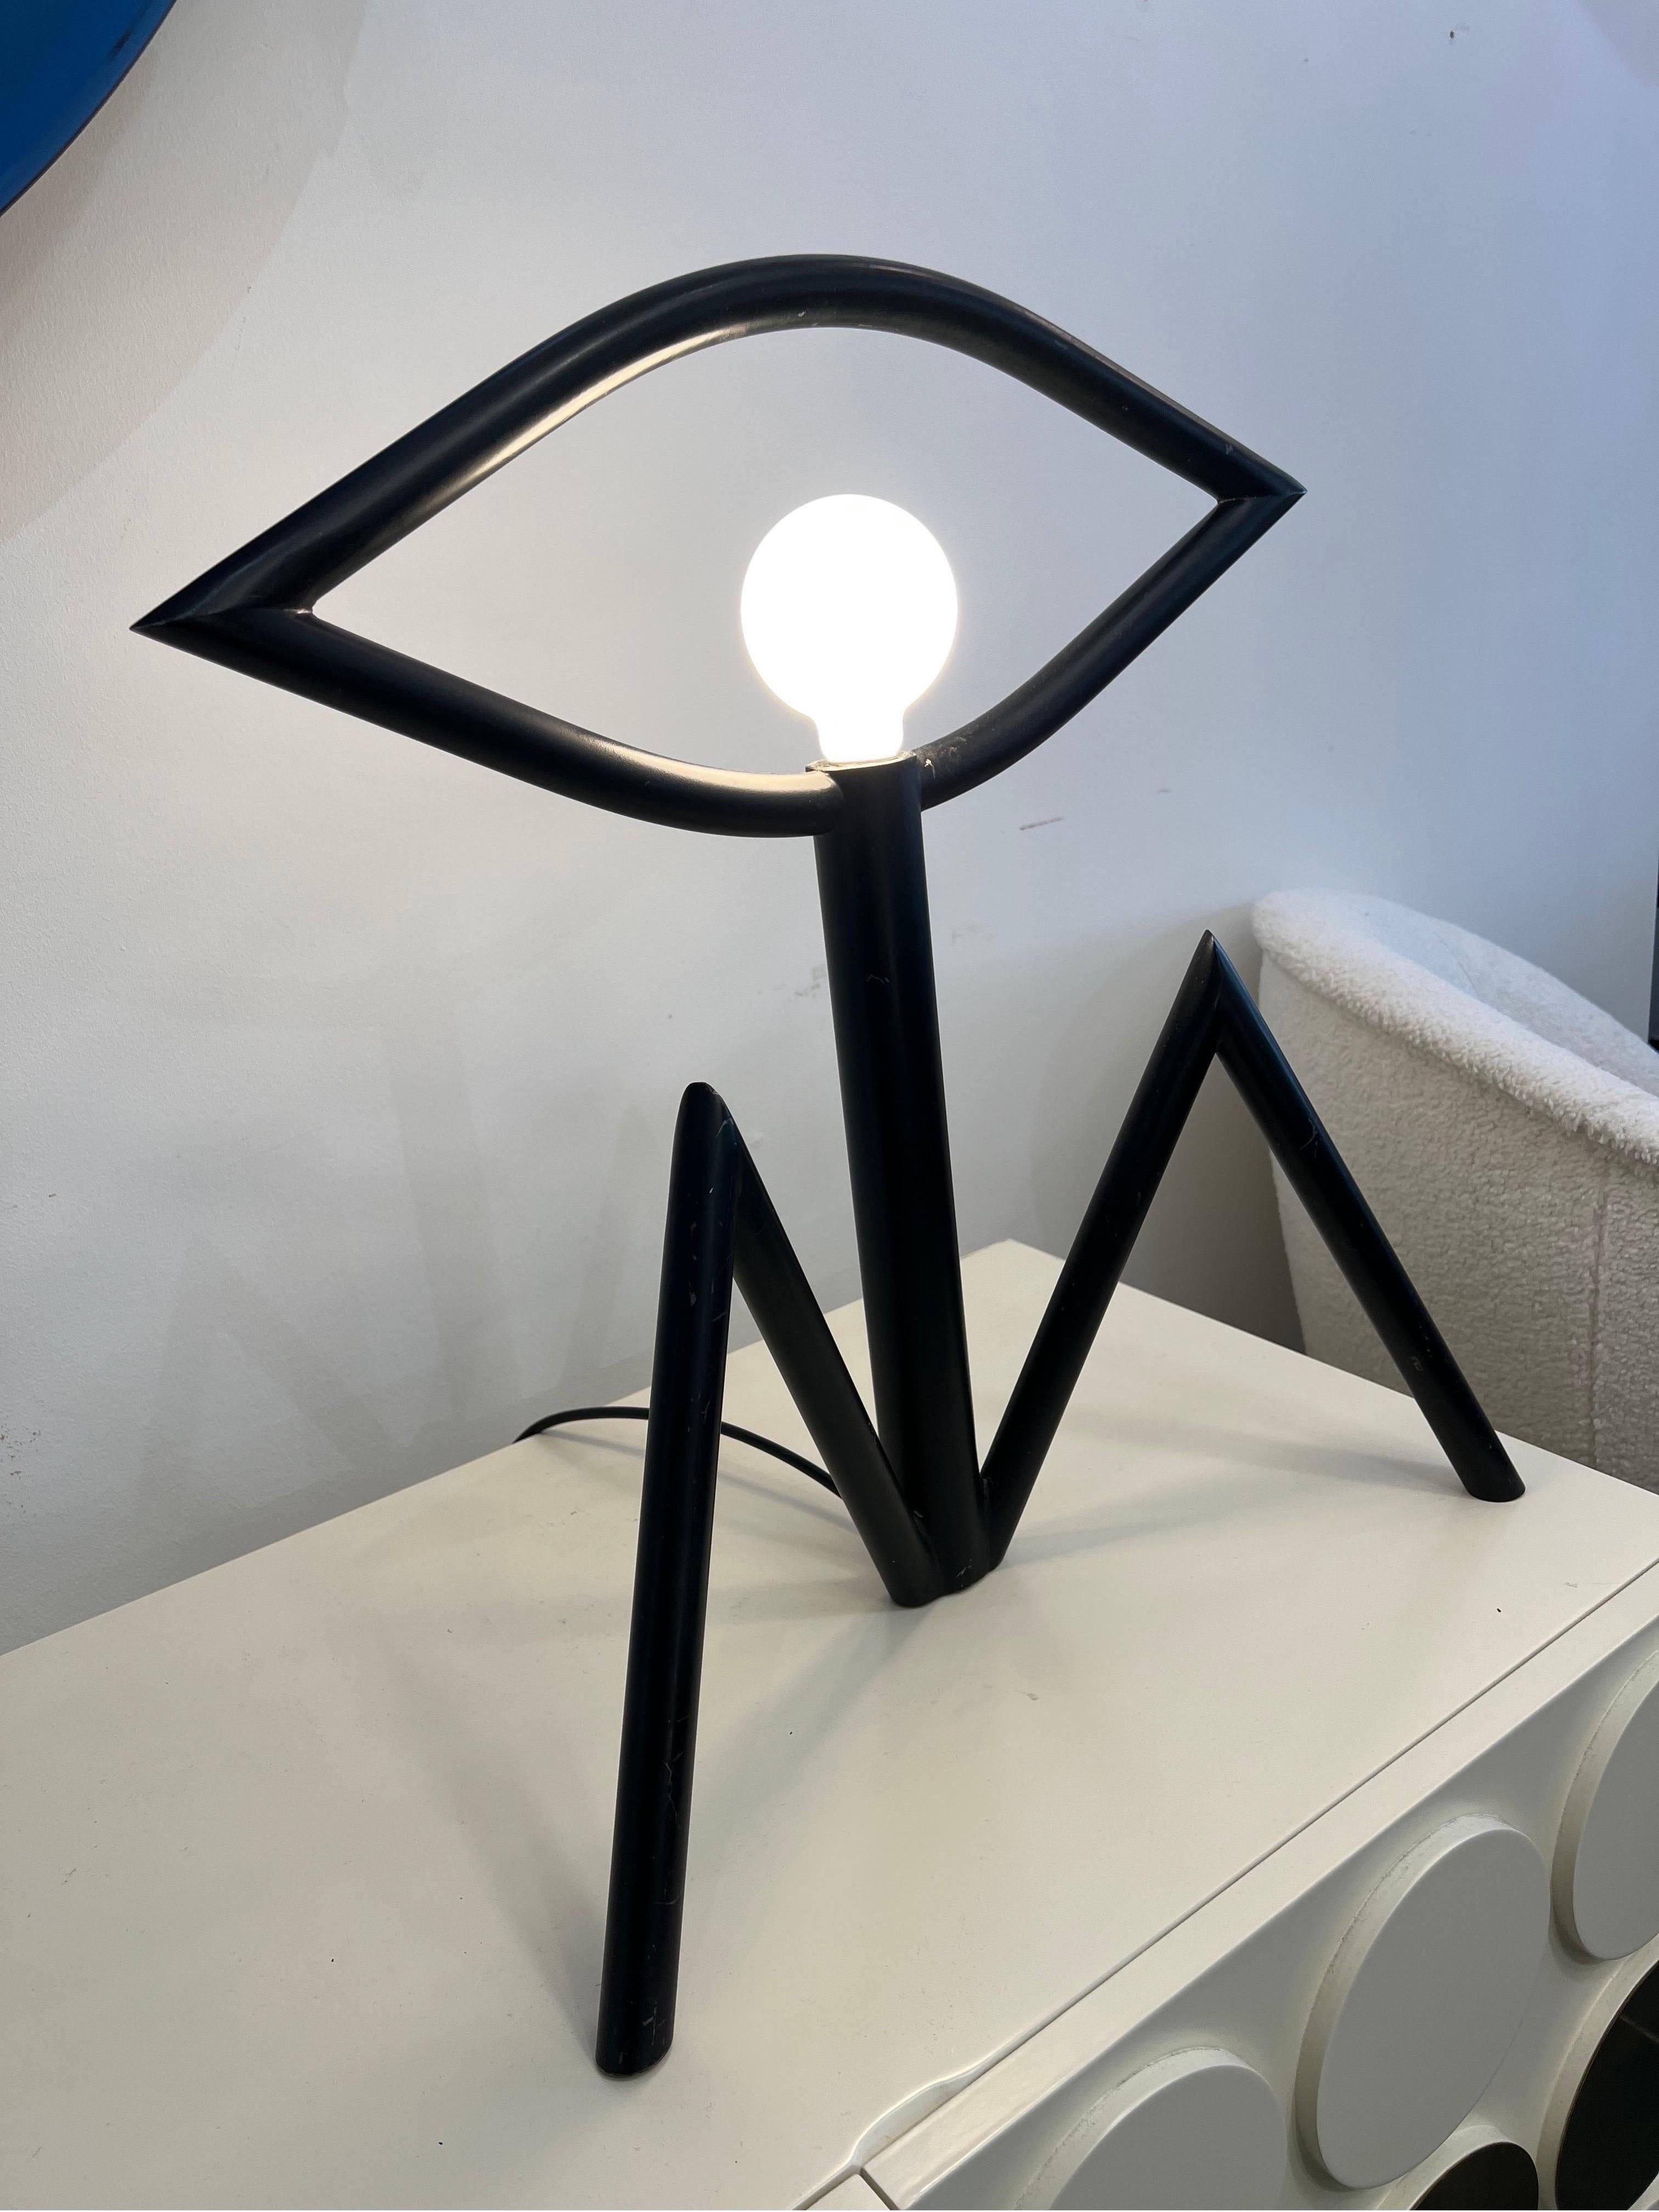 A sculptural table lamp in black powder coated steel depicting an abstract sitting figure by Stephen Bam for Maxray Japan.

Dimensions: D:18cm W:49cm H:54cm